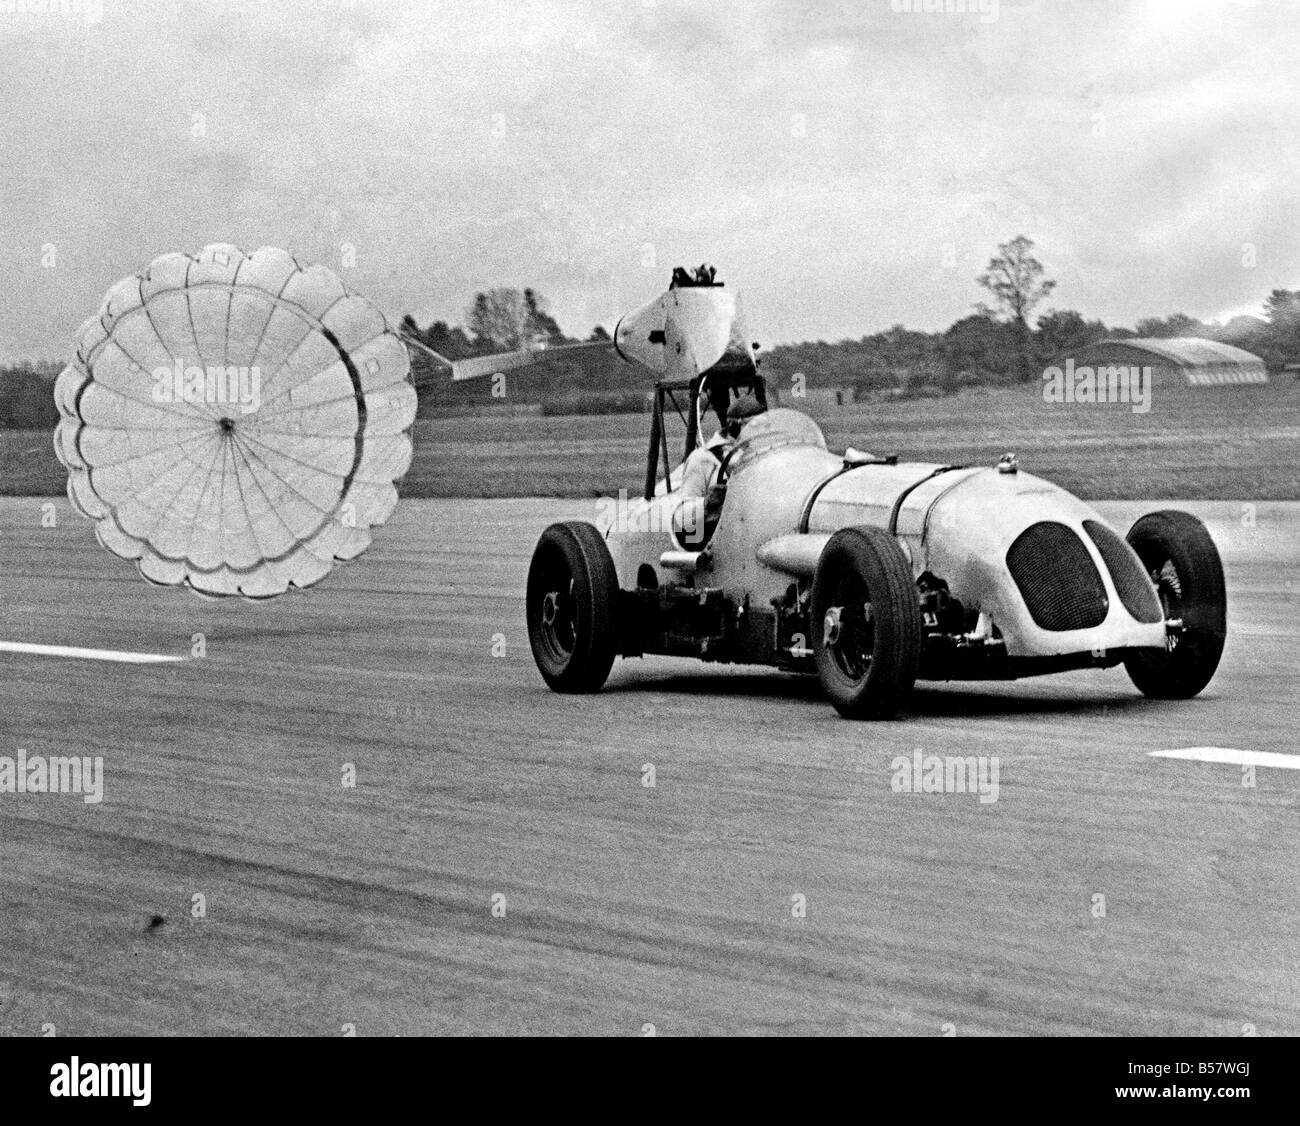 A demonstration of the G.Q. retractable aircraft brake parachute took place today at Dunsfold aerodrome, and the test vehicle used was a racing car which set up its first lap record at Brooklands in 1933. ;May 1954 ;P004672 Stock Photo